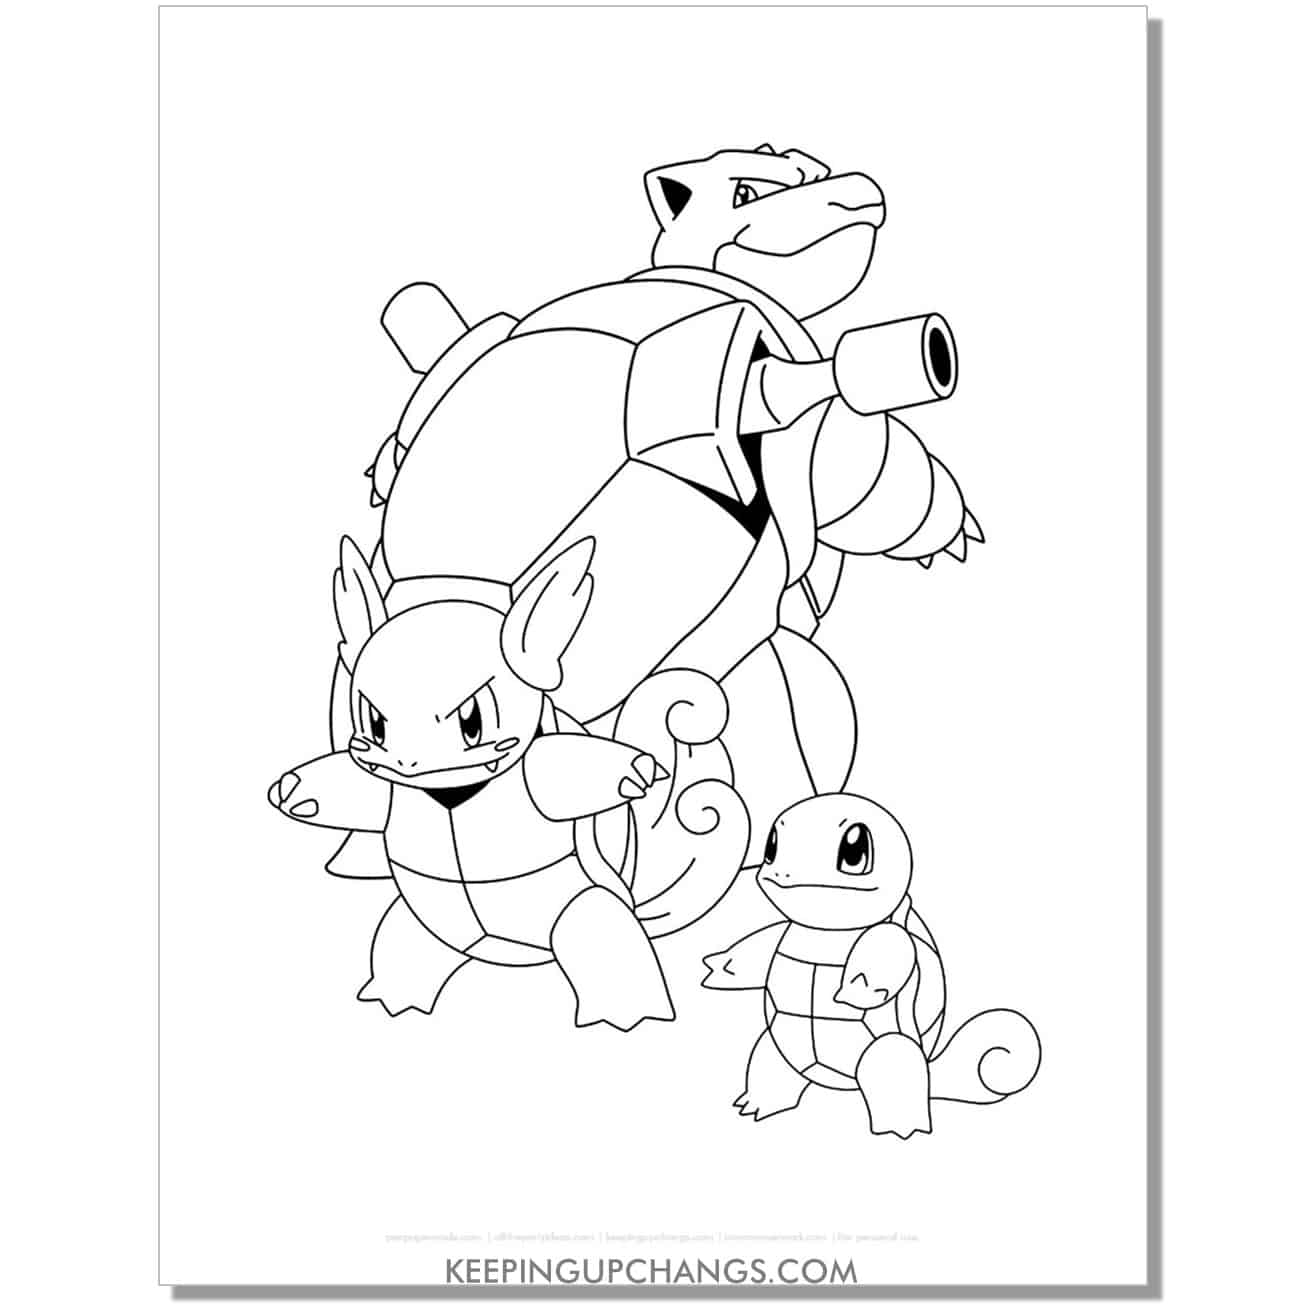 squirtle, wartortle, blastoise pokemon coloring page, sheet.